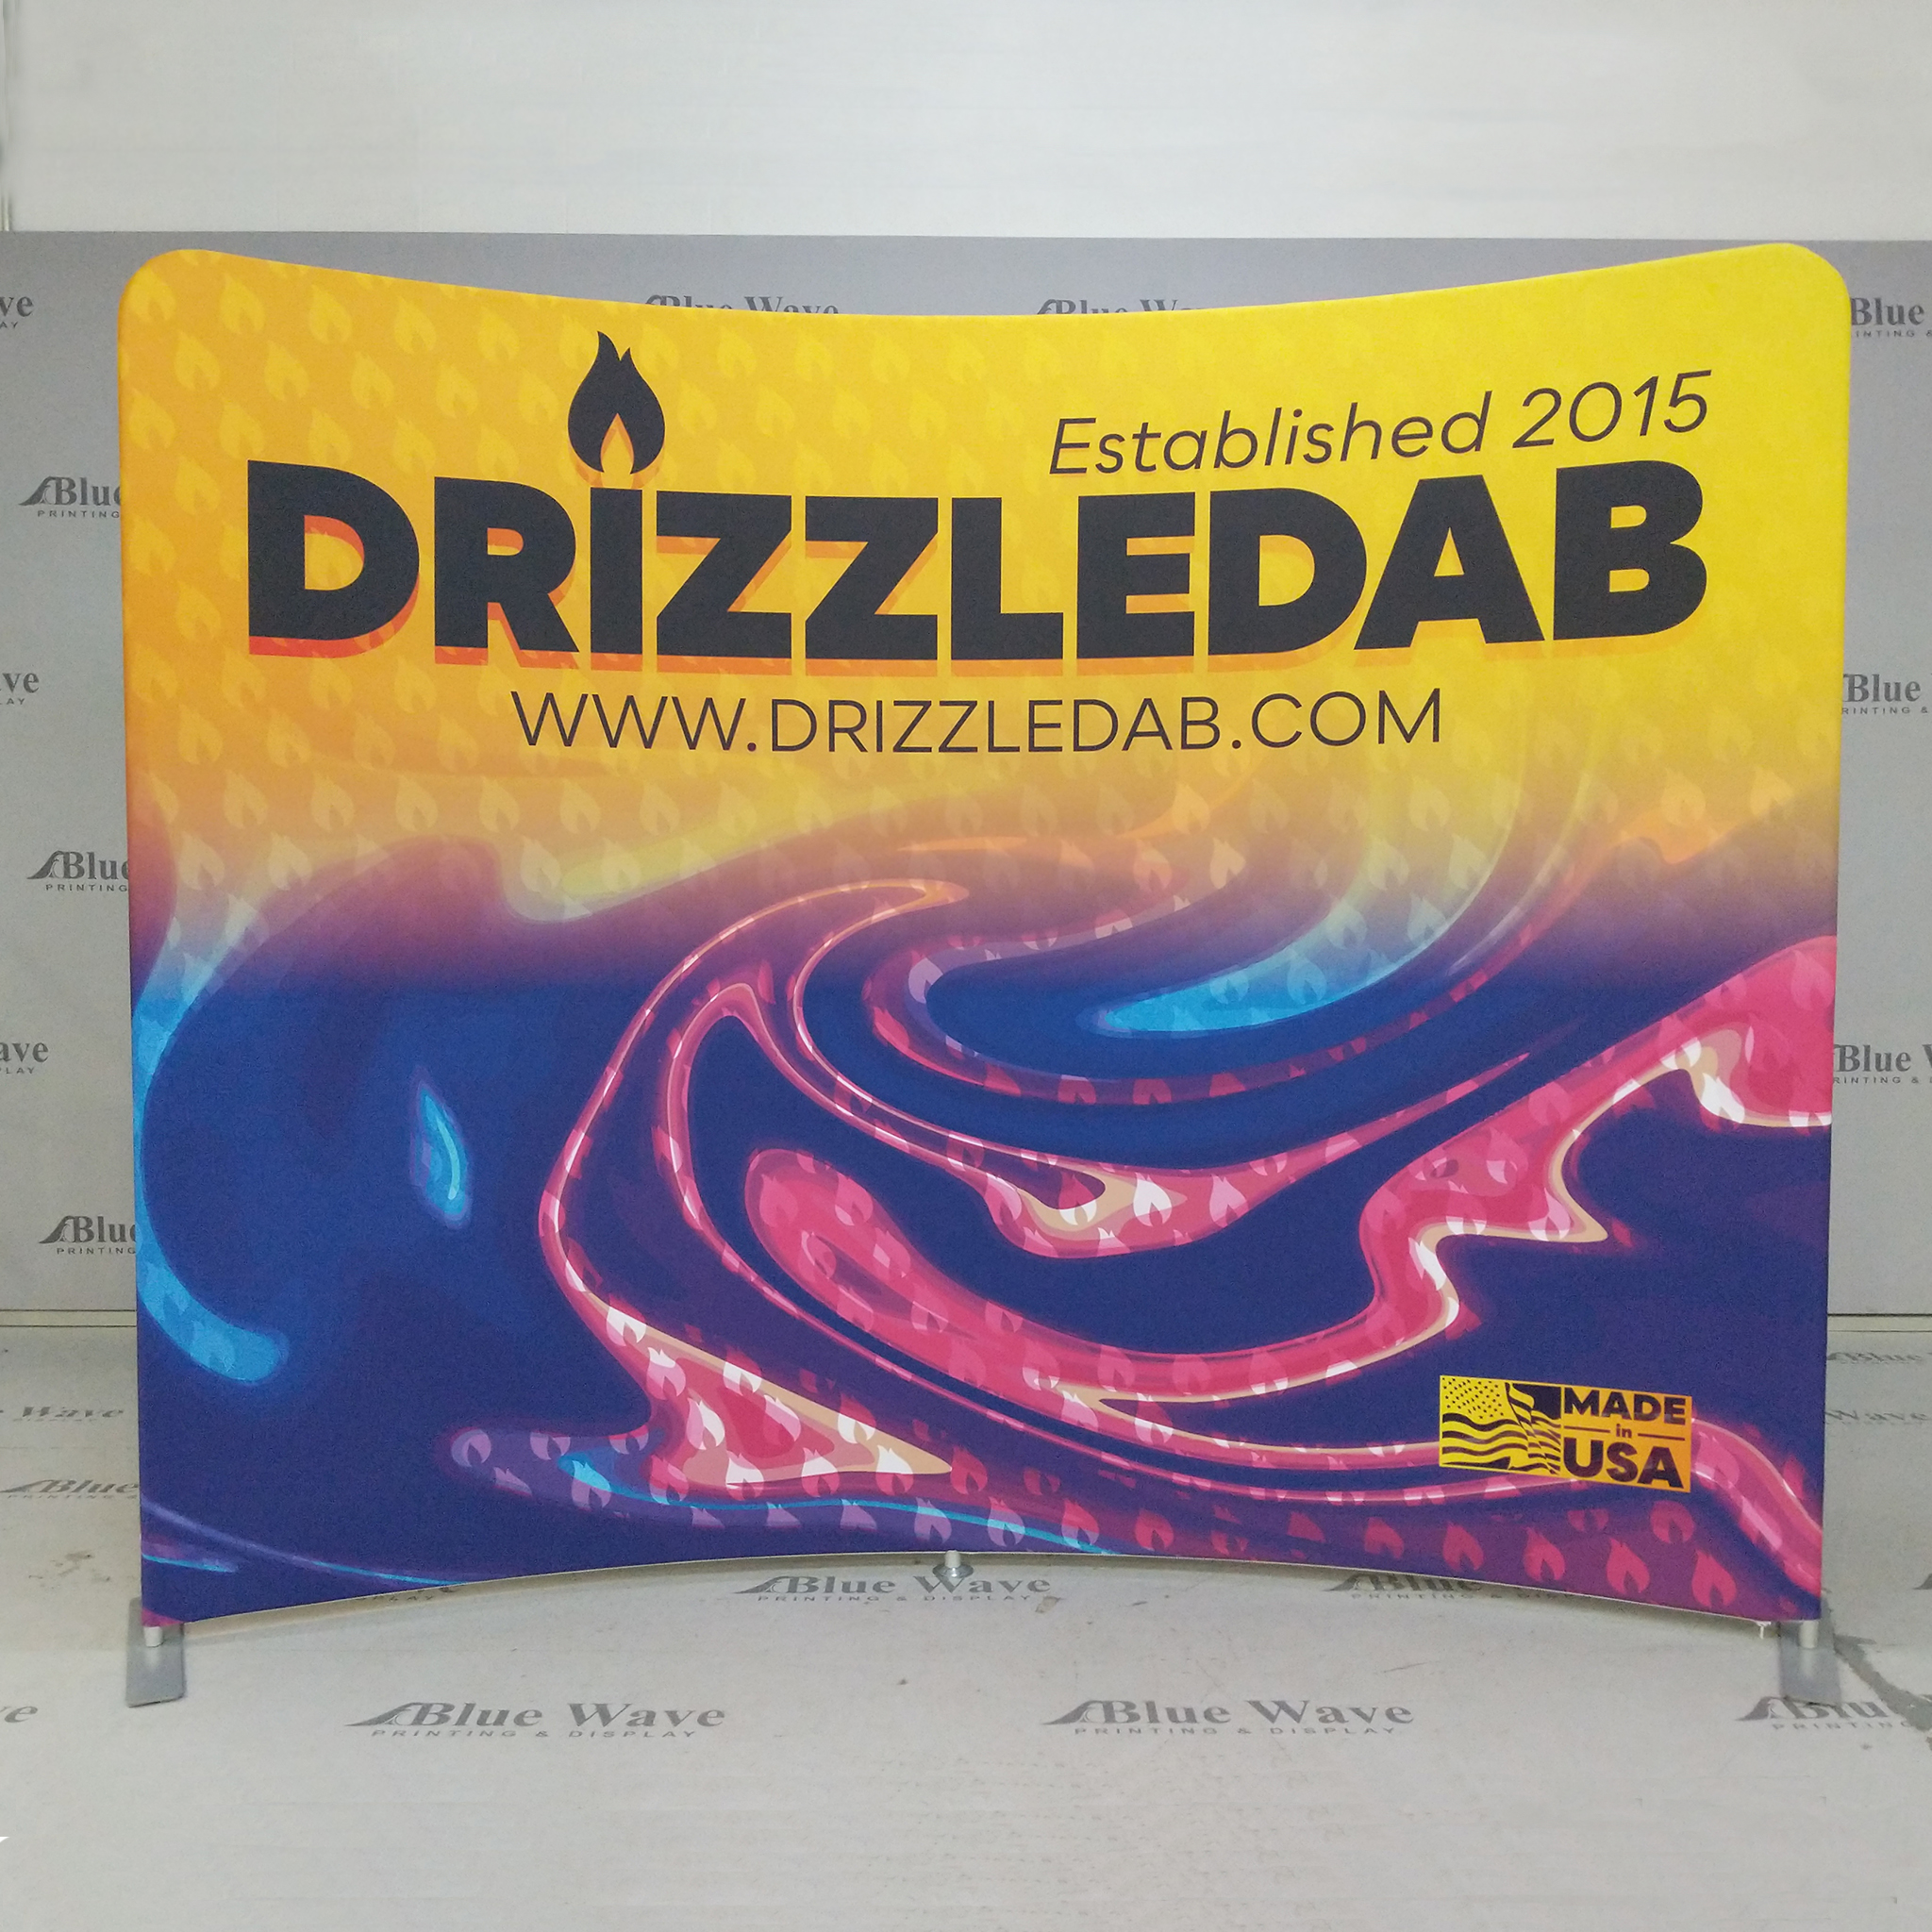 a tradeshow banner for a CBD manufacturing company called Drizzle Dab